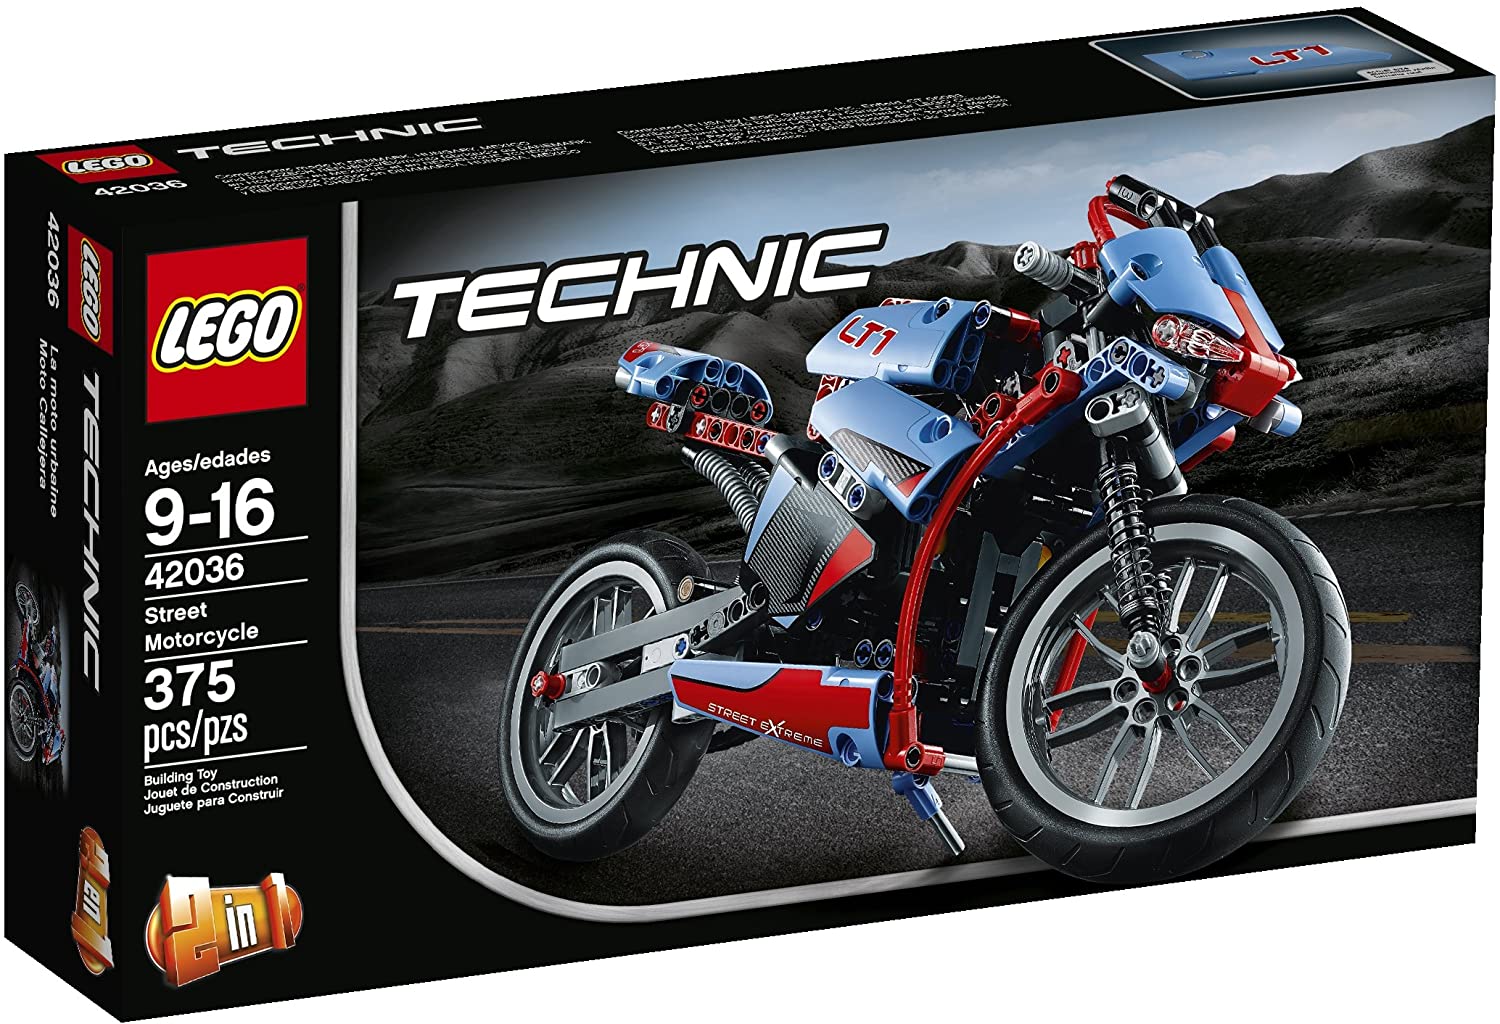 7 Best LEGO Motorcycle Sets 2023 - Buying Guide & Reviews 1